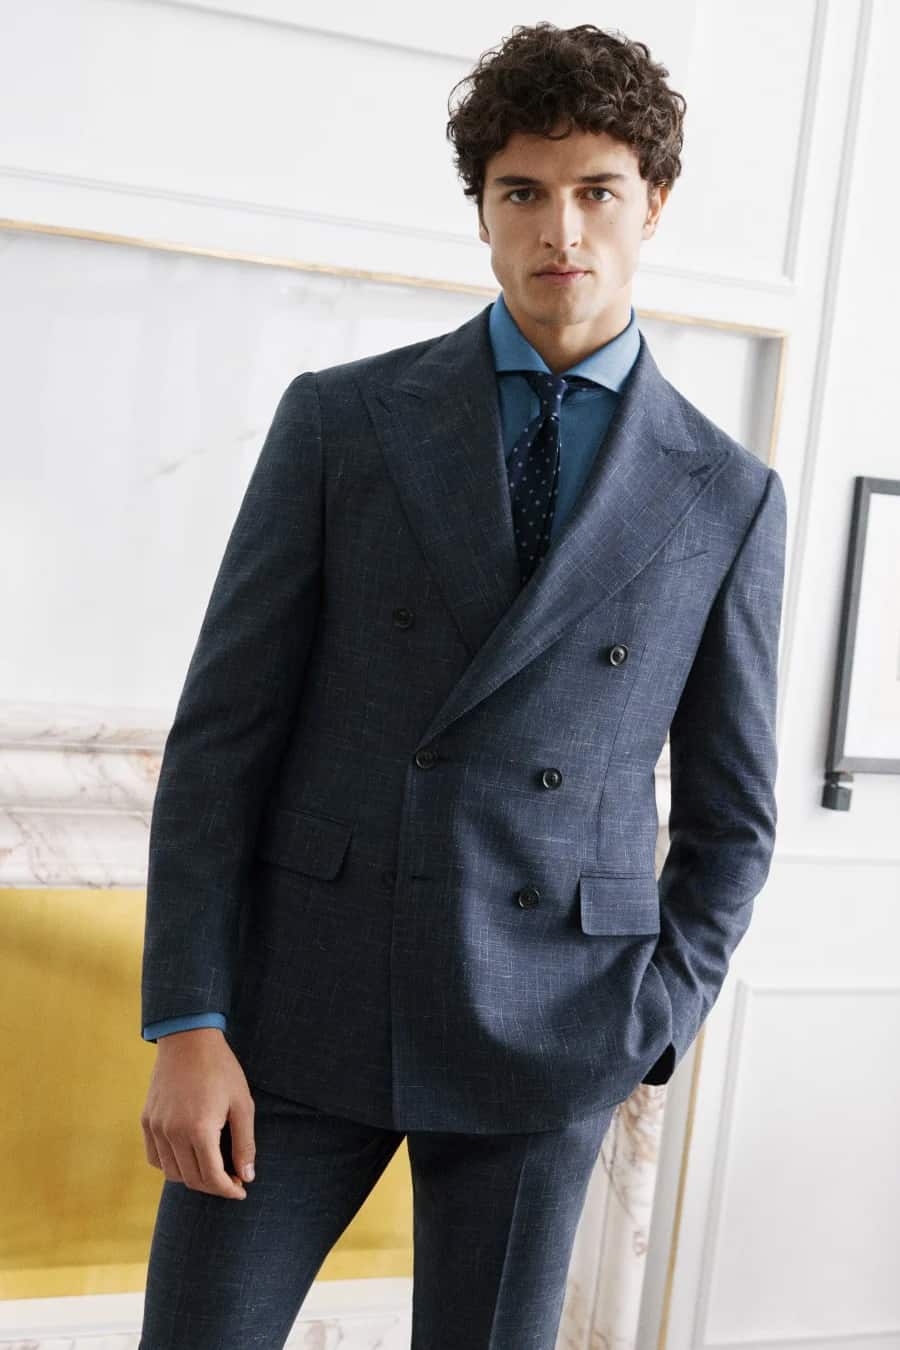 Men's double-breasted lounge suit